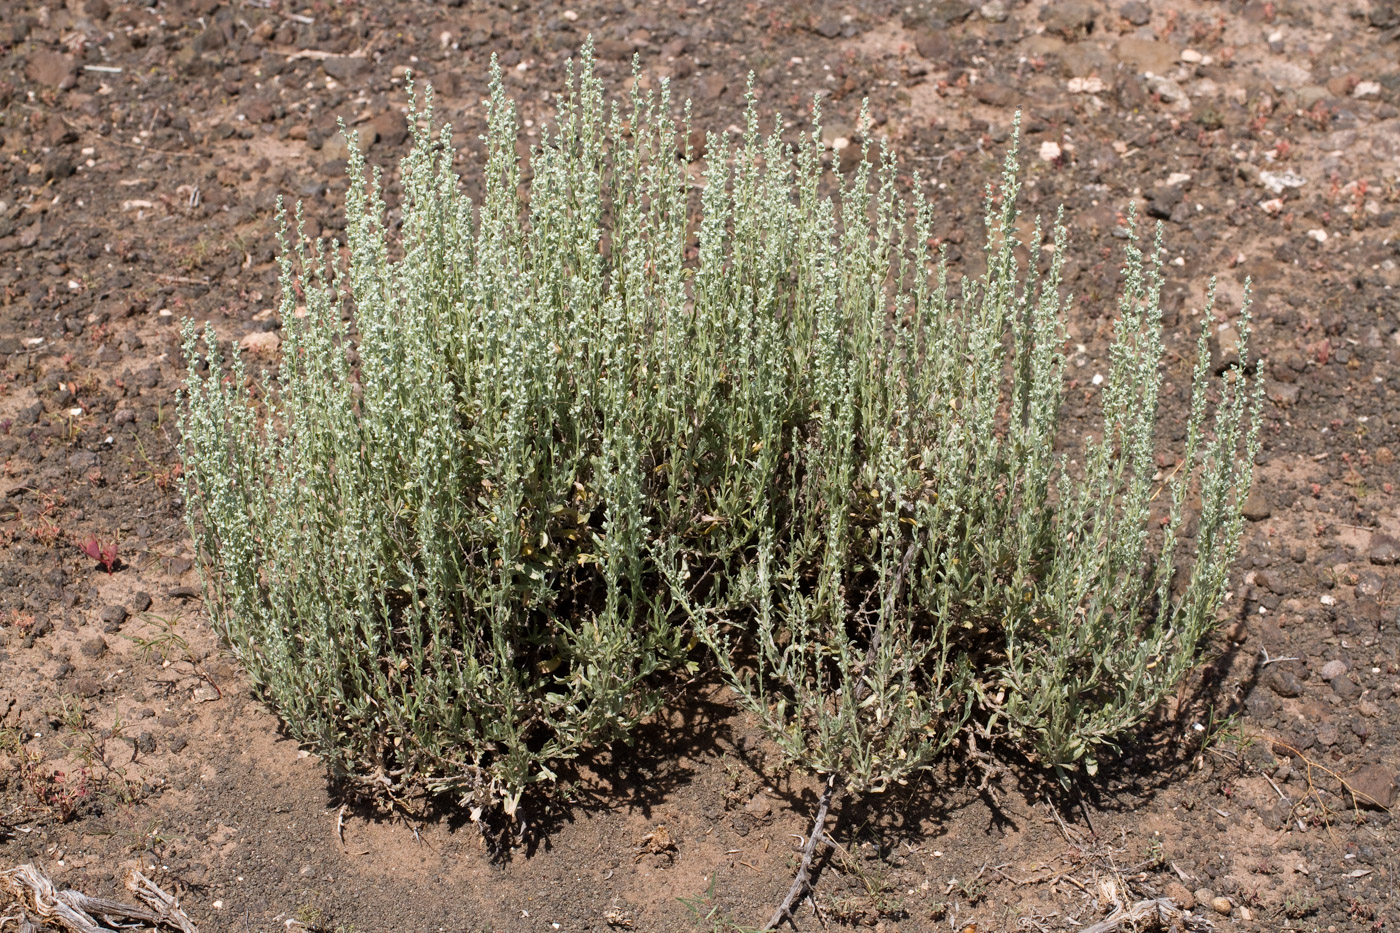 Growth habit with upright stems and compact stature